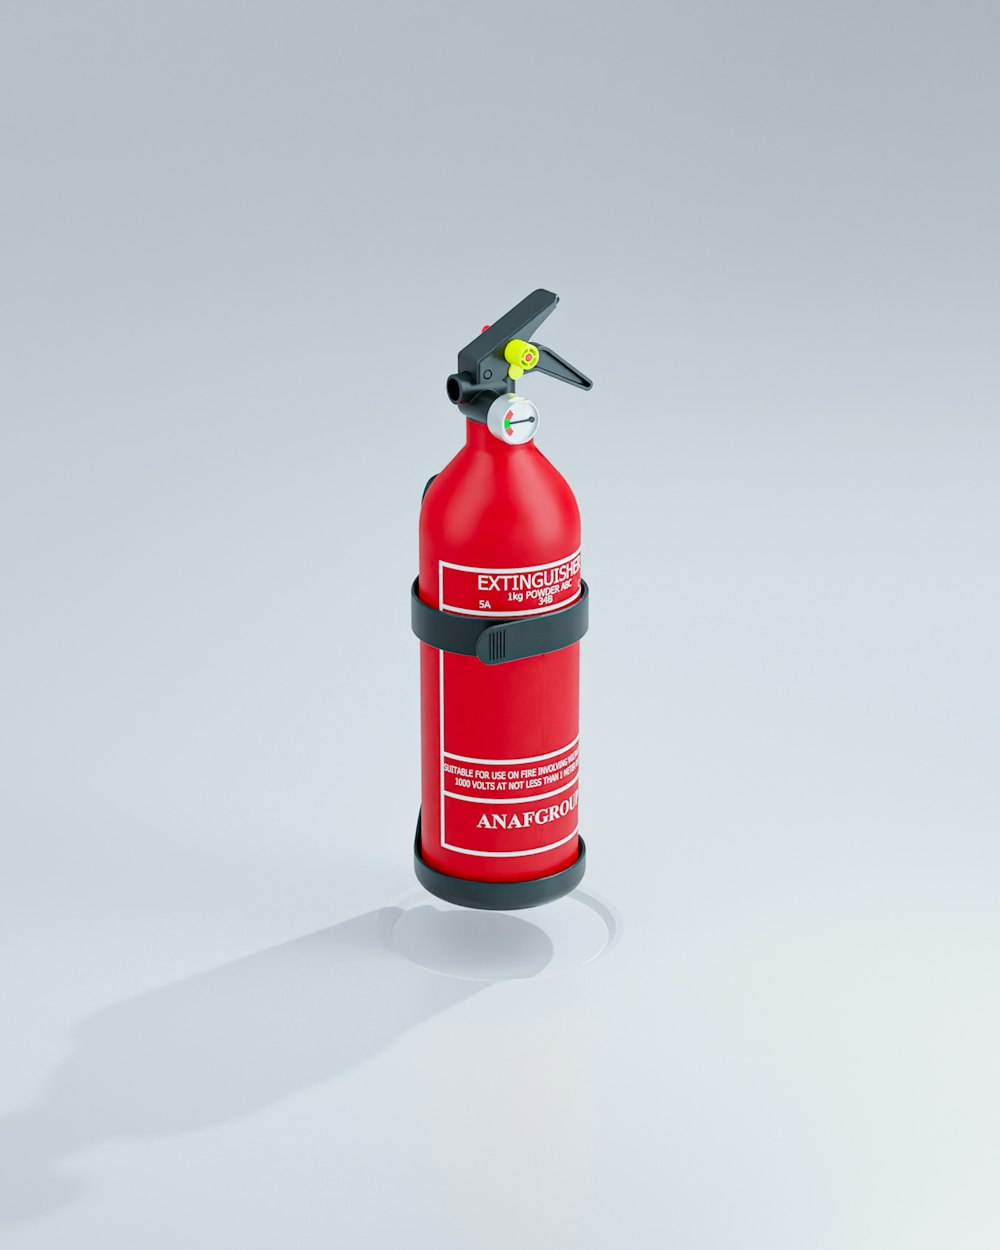 a red fire extinguisher on a white background